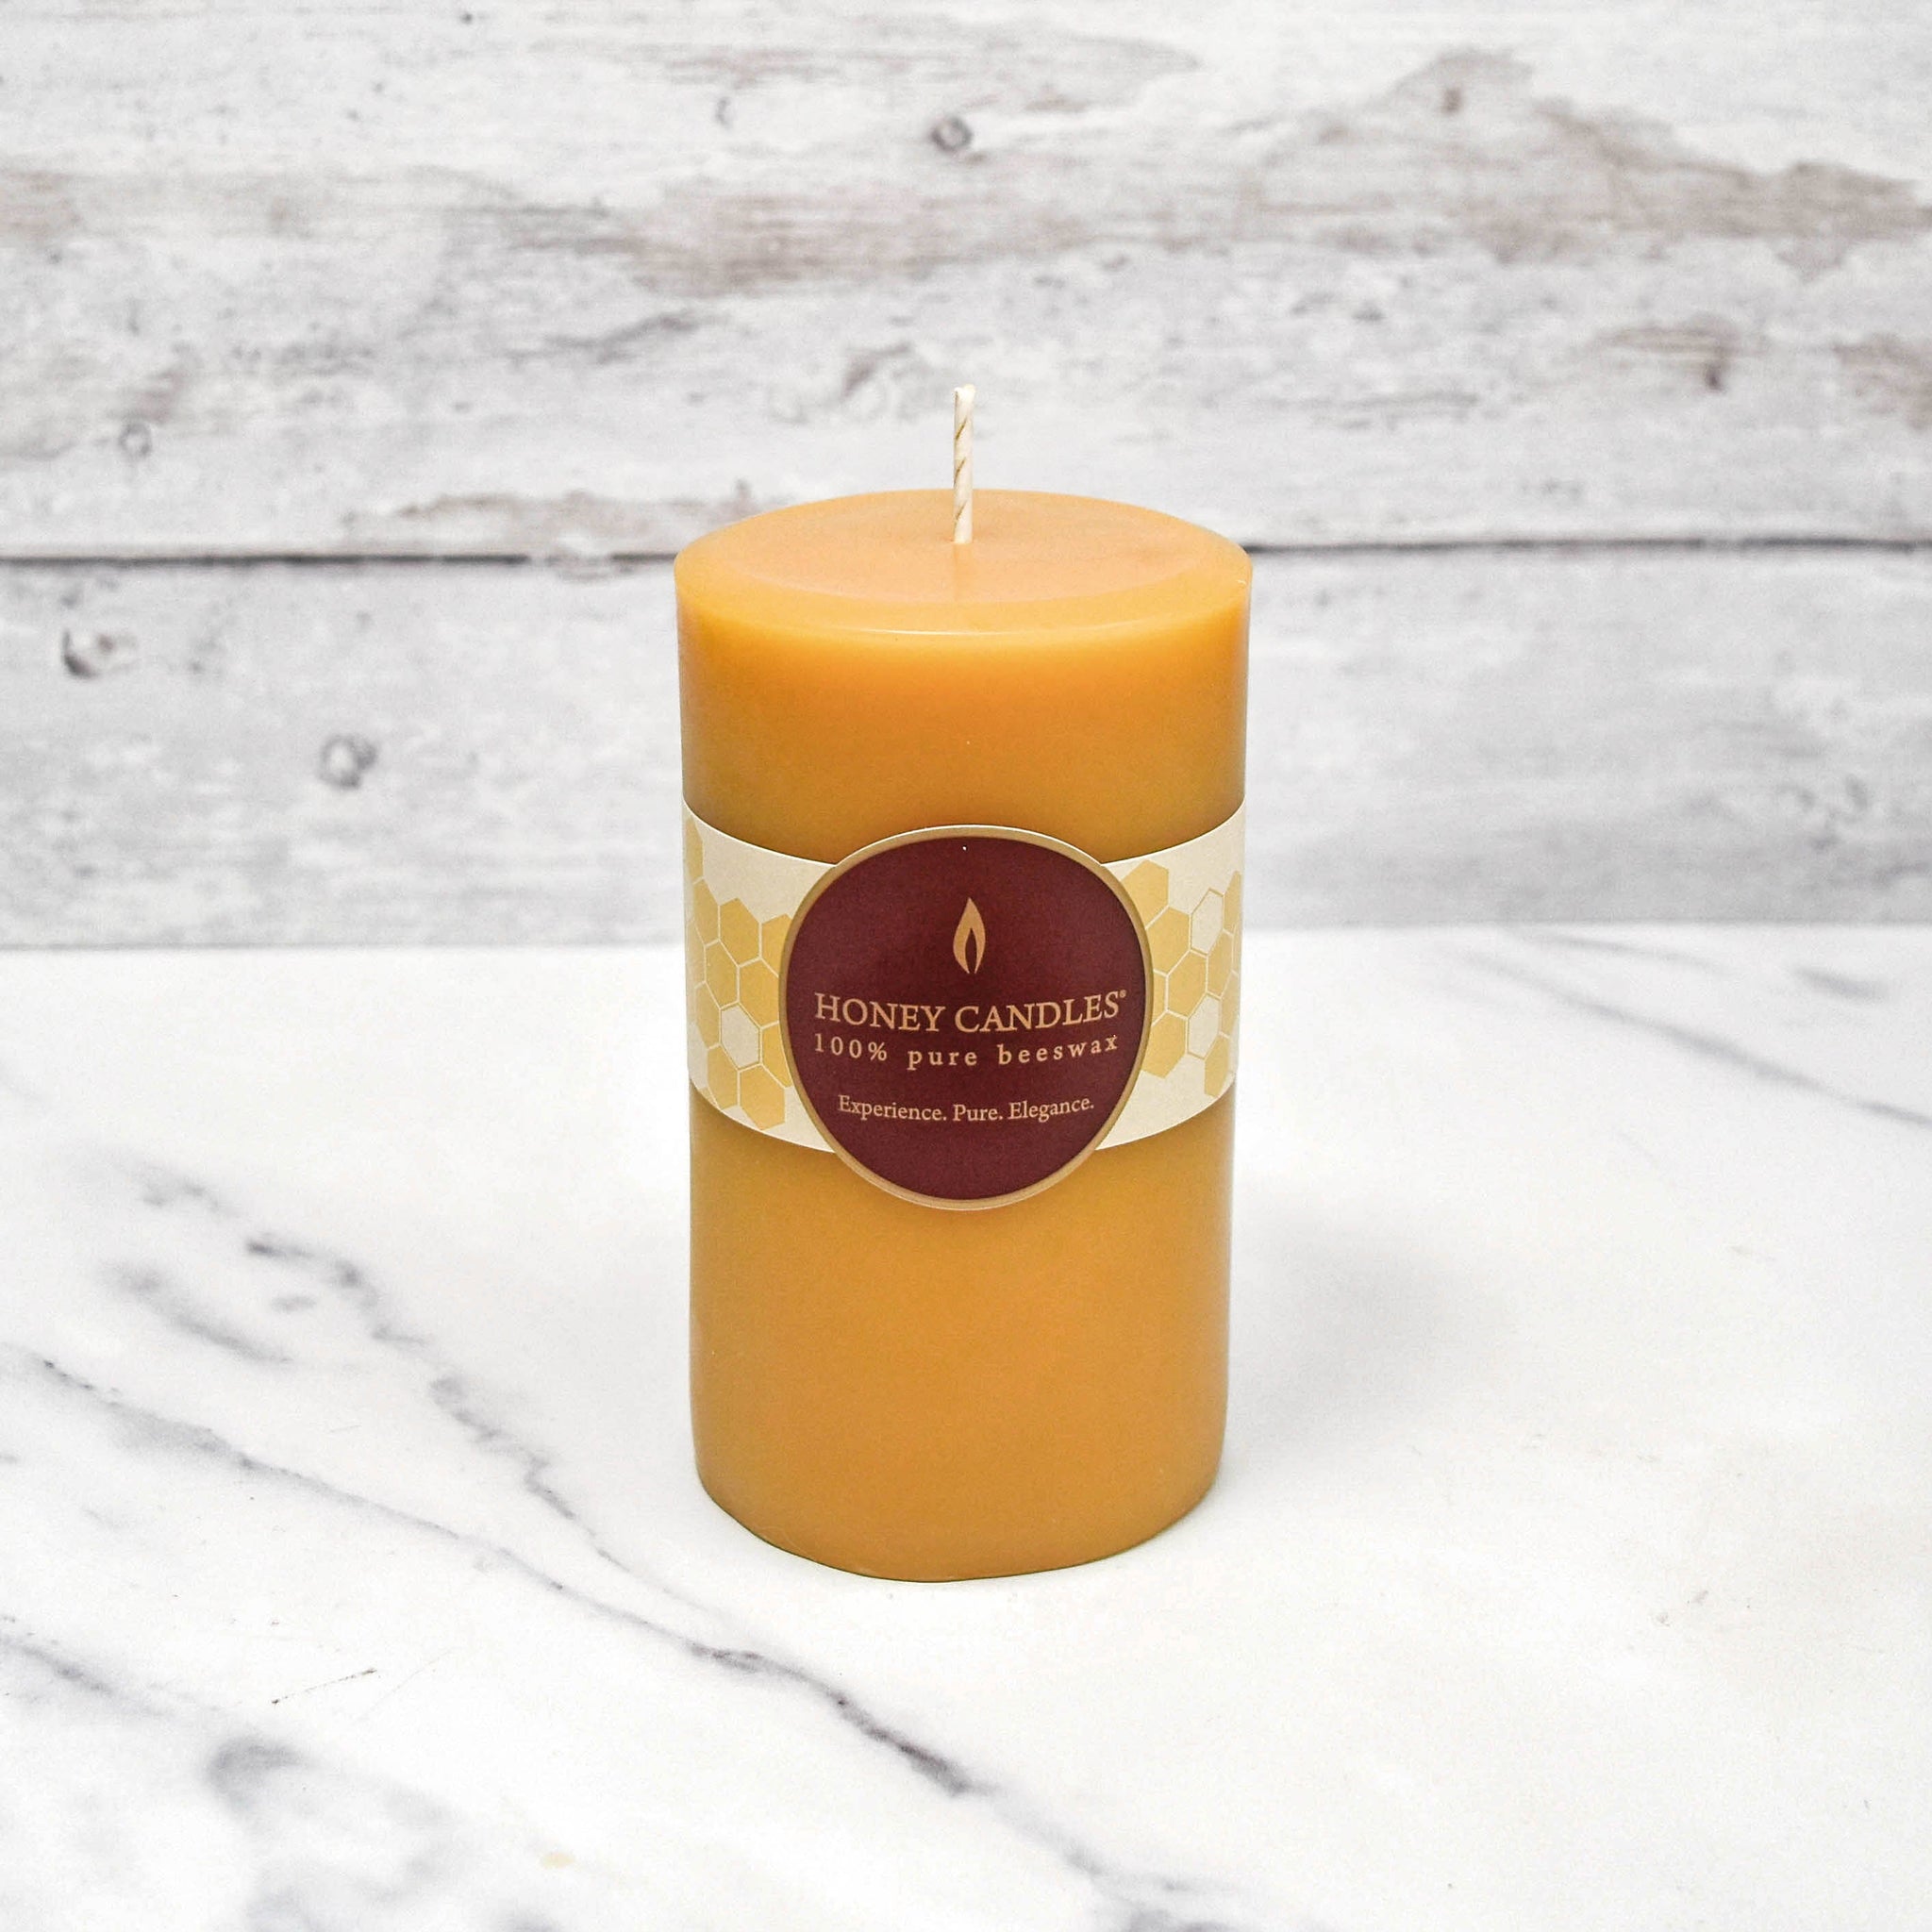 Honey Candles - 5" Round Pillar Beeswax Candle